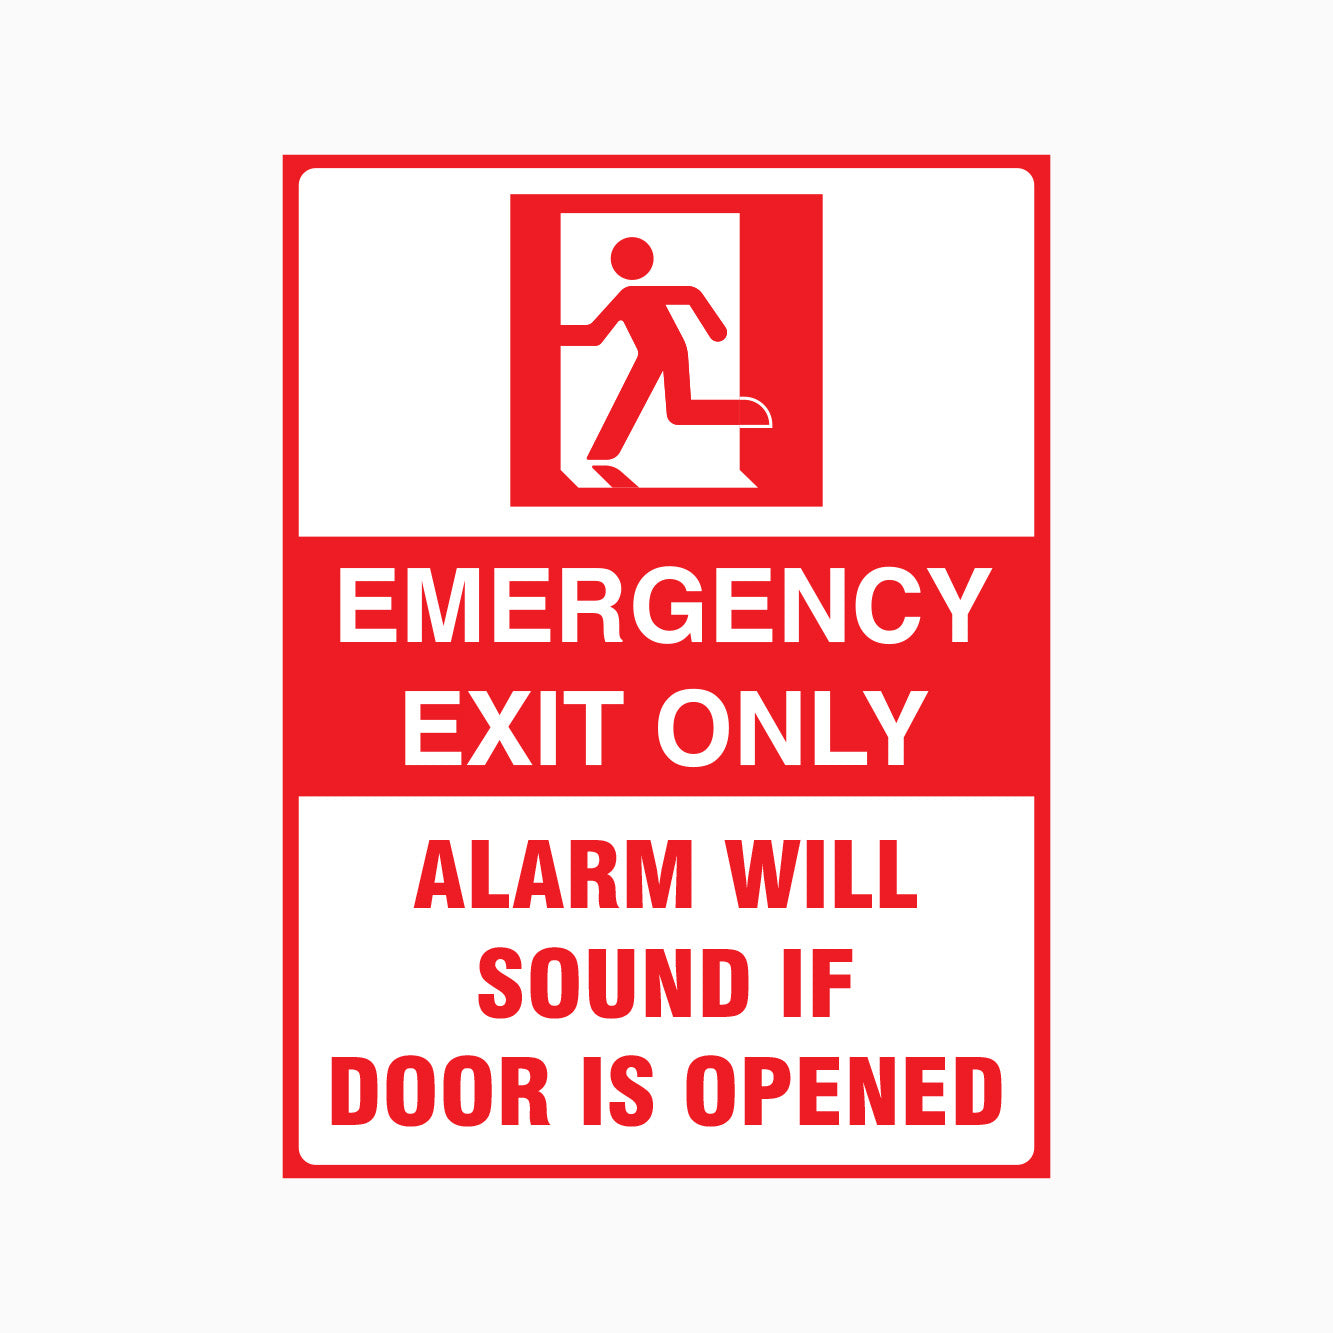 EMERGENCY EXIT ONLY SIGN - ALARM WILL SOUND IF DOOR IS OPENED SIGN